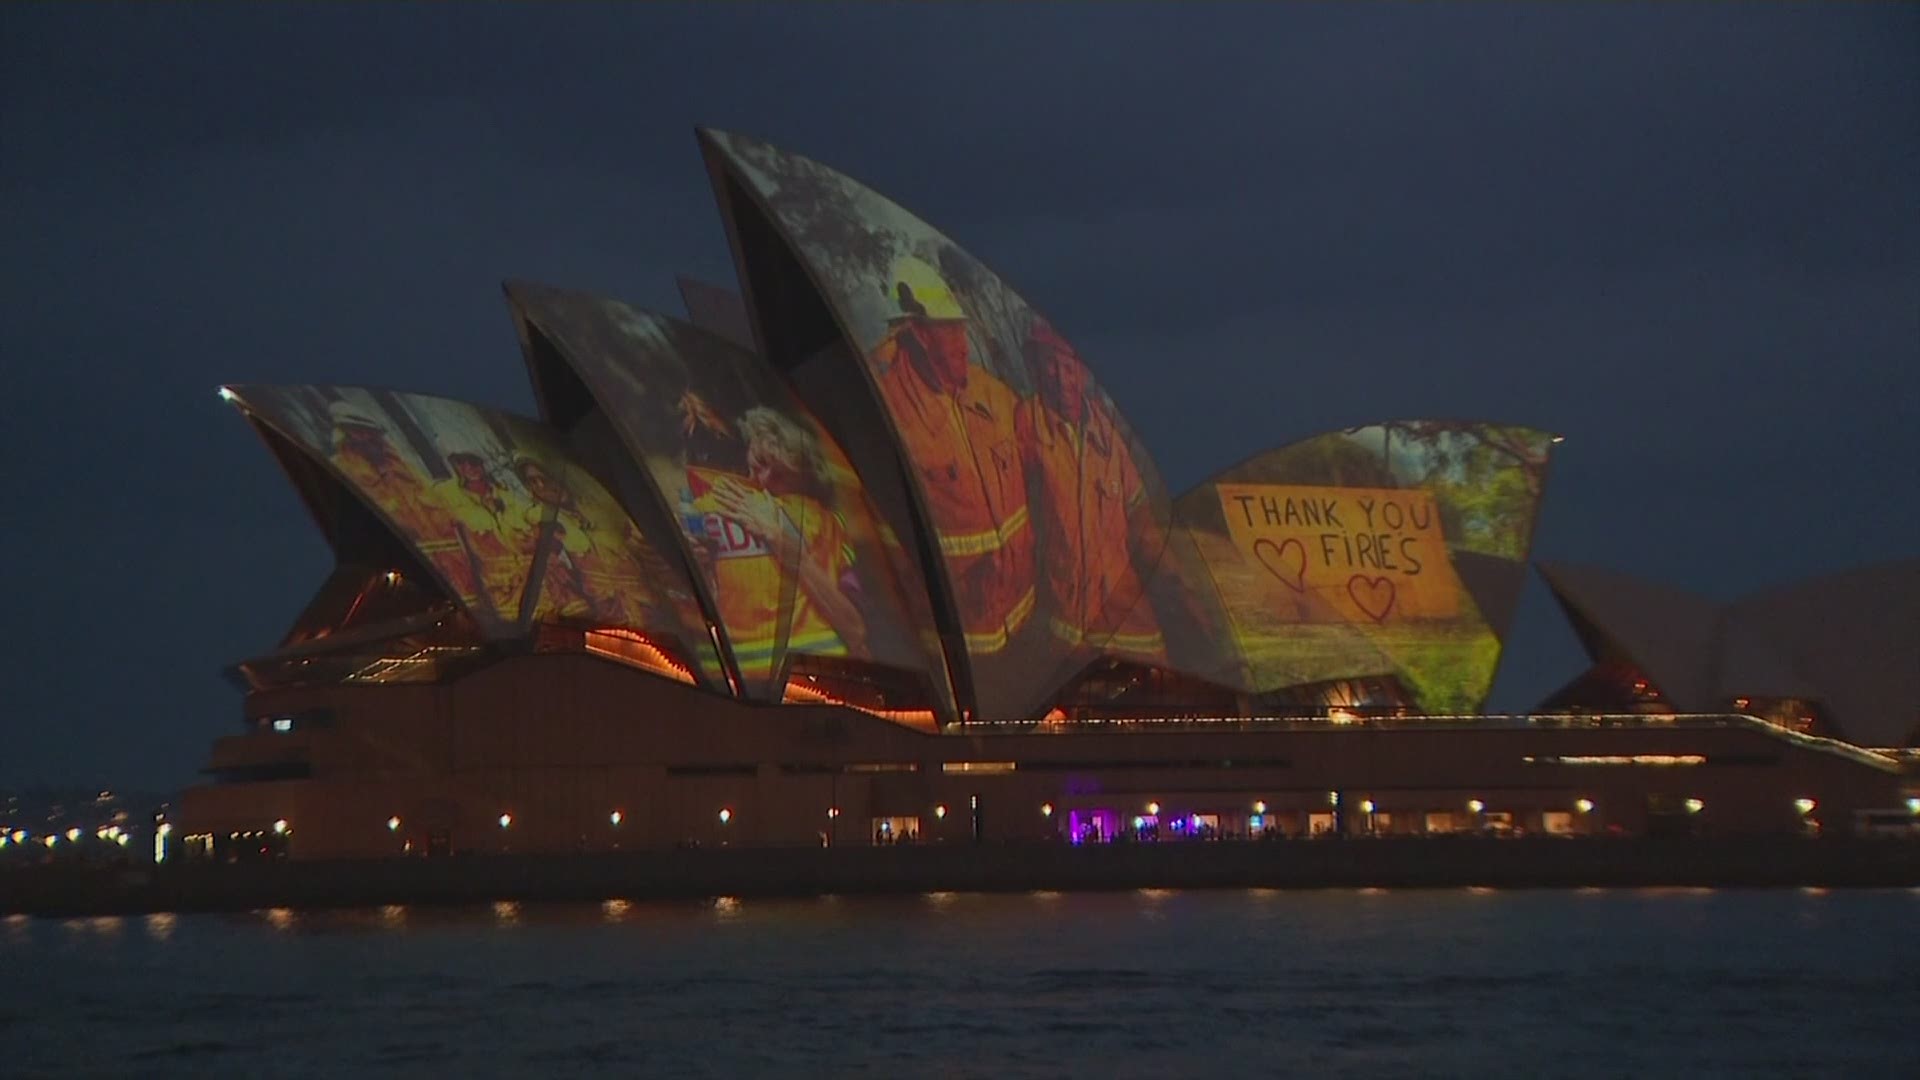 The sails of the iconic Sydney Opera House were illuminated on Saturday to show support for firefighters and wildfires-affected communities. (CHANNEL 7 via AP)